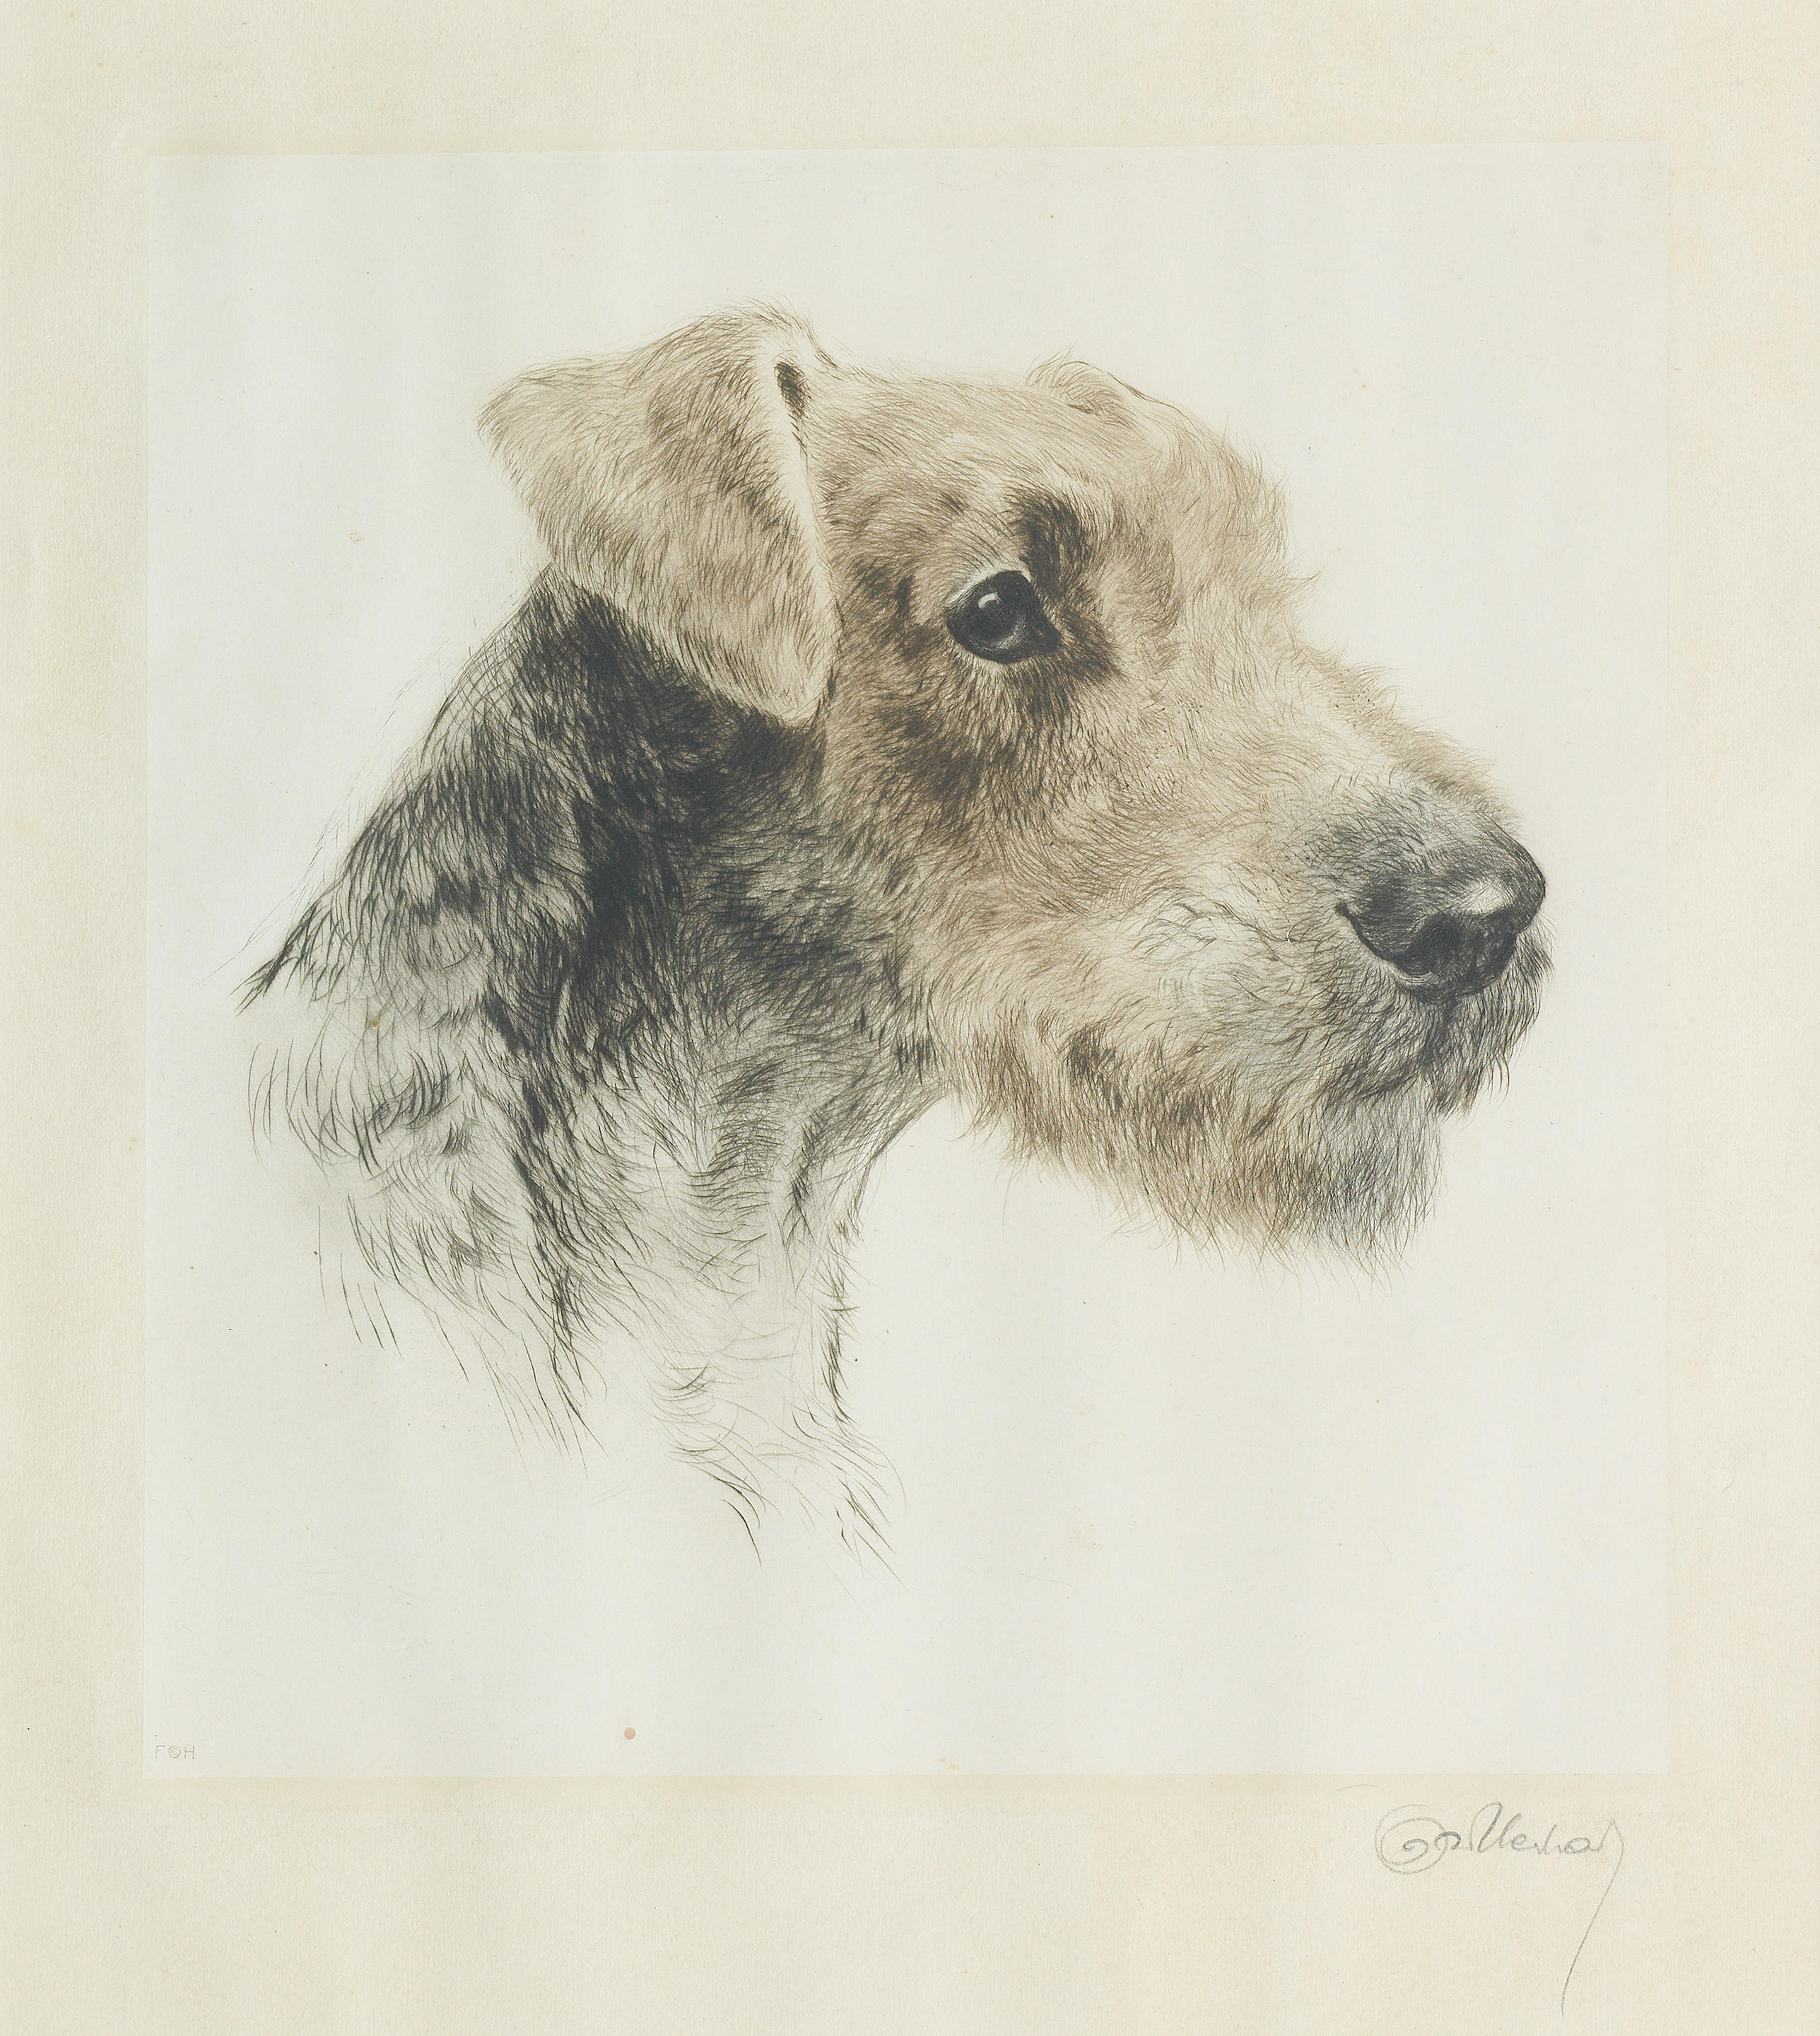 Click for larger image: A dry-point aquatint etching of An Airedale Terrier by Kurt Meyer Eberhardt (German, 1895 - 1957) - A dry-point aquatint etching of An Airedale Terrier by Kurt Meyer Eberhardt (German, 1895 - 1957)